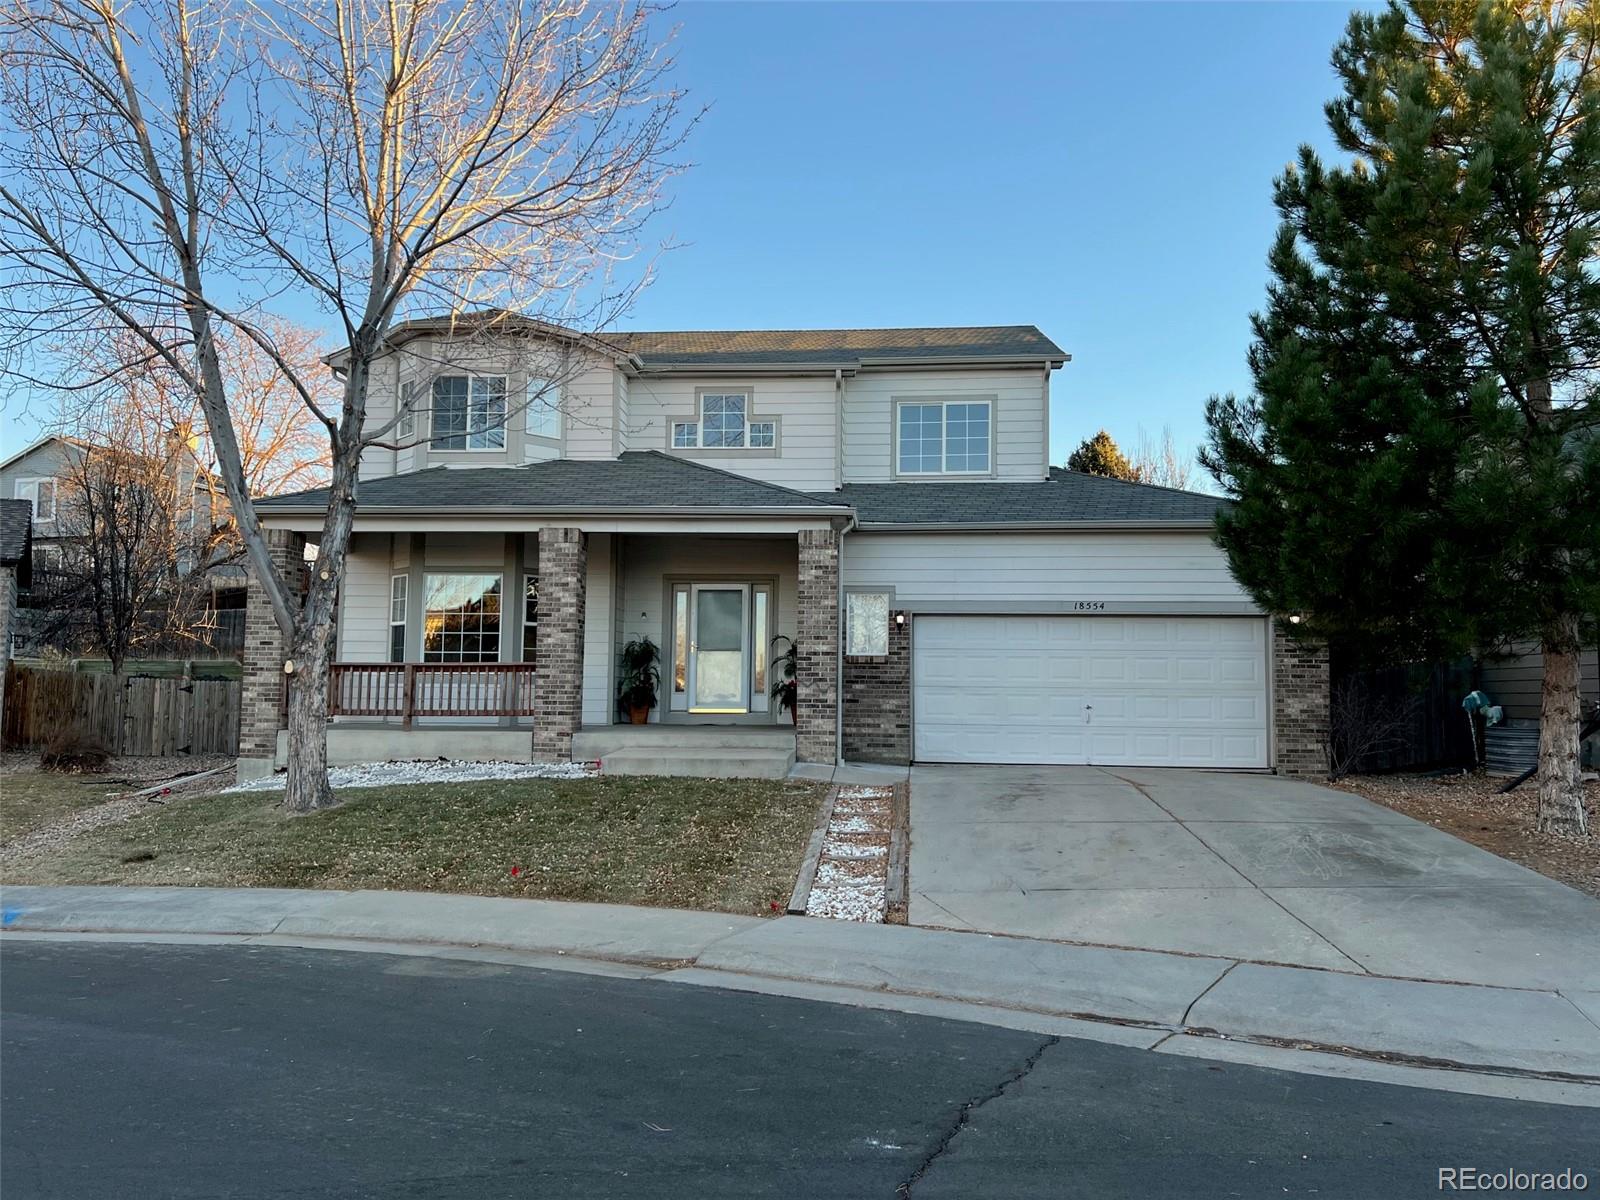 18554 E Bethany Place, aurora MLS: 6375836 Beds: 3 Baths: 3 Price: $559,000